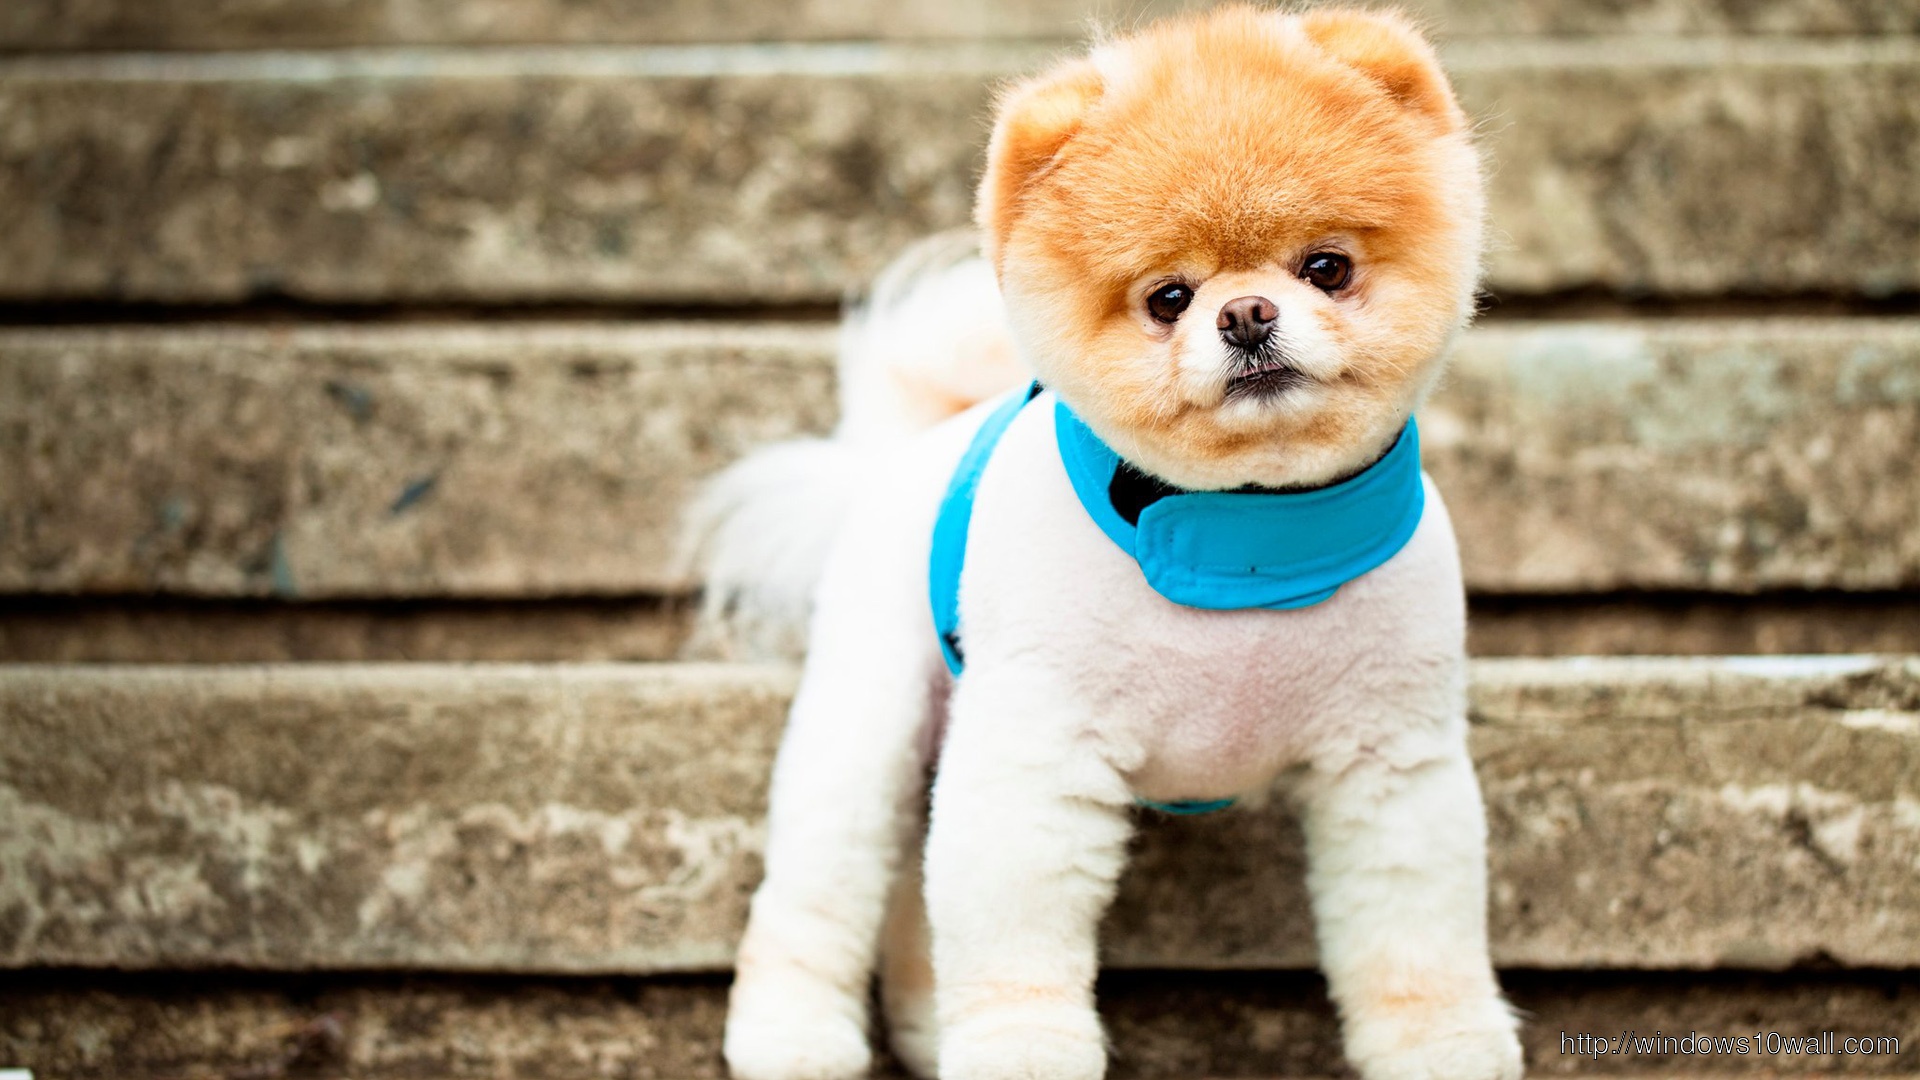 Boo The Cutest Dog Wallpaper Windows 10 Wallpapers Images, Photos, Reviews